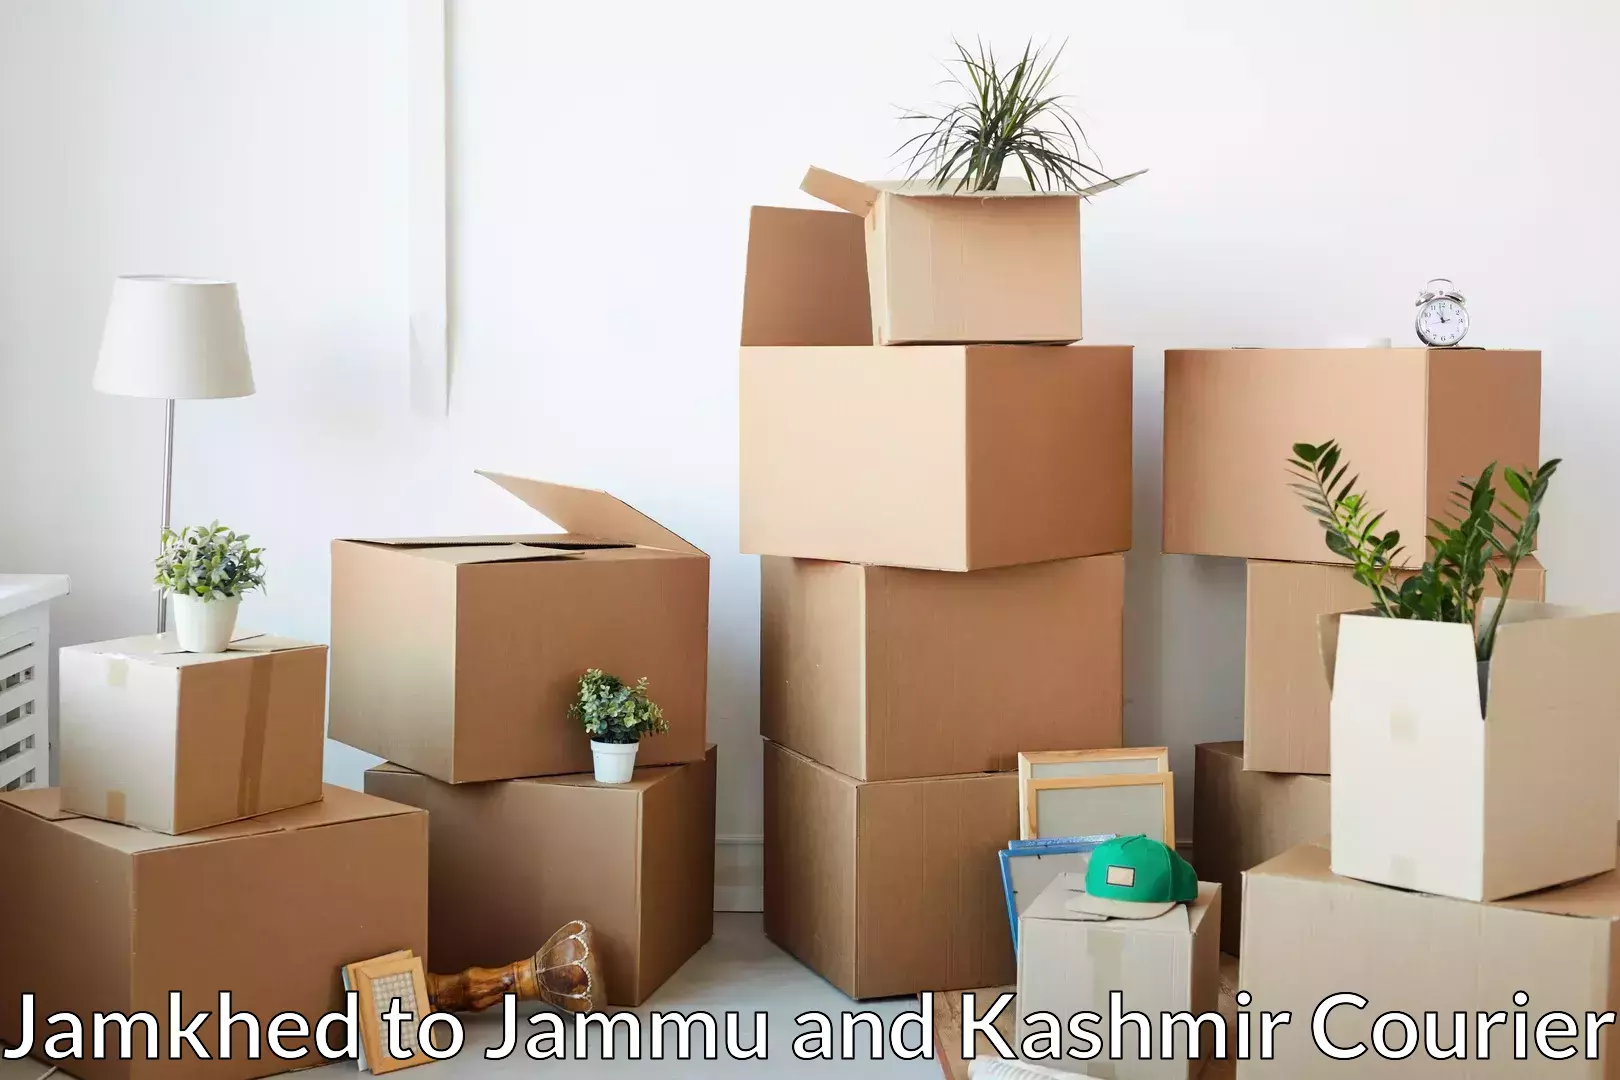 Trusted relocation experts Jamkhed to Anantnag